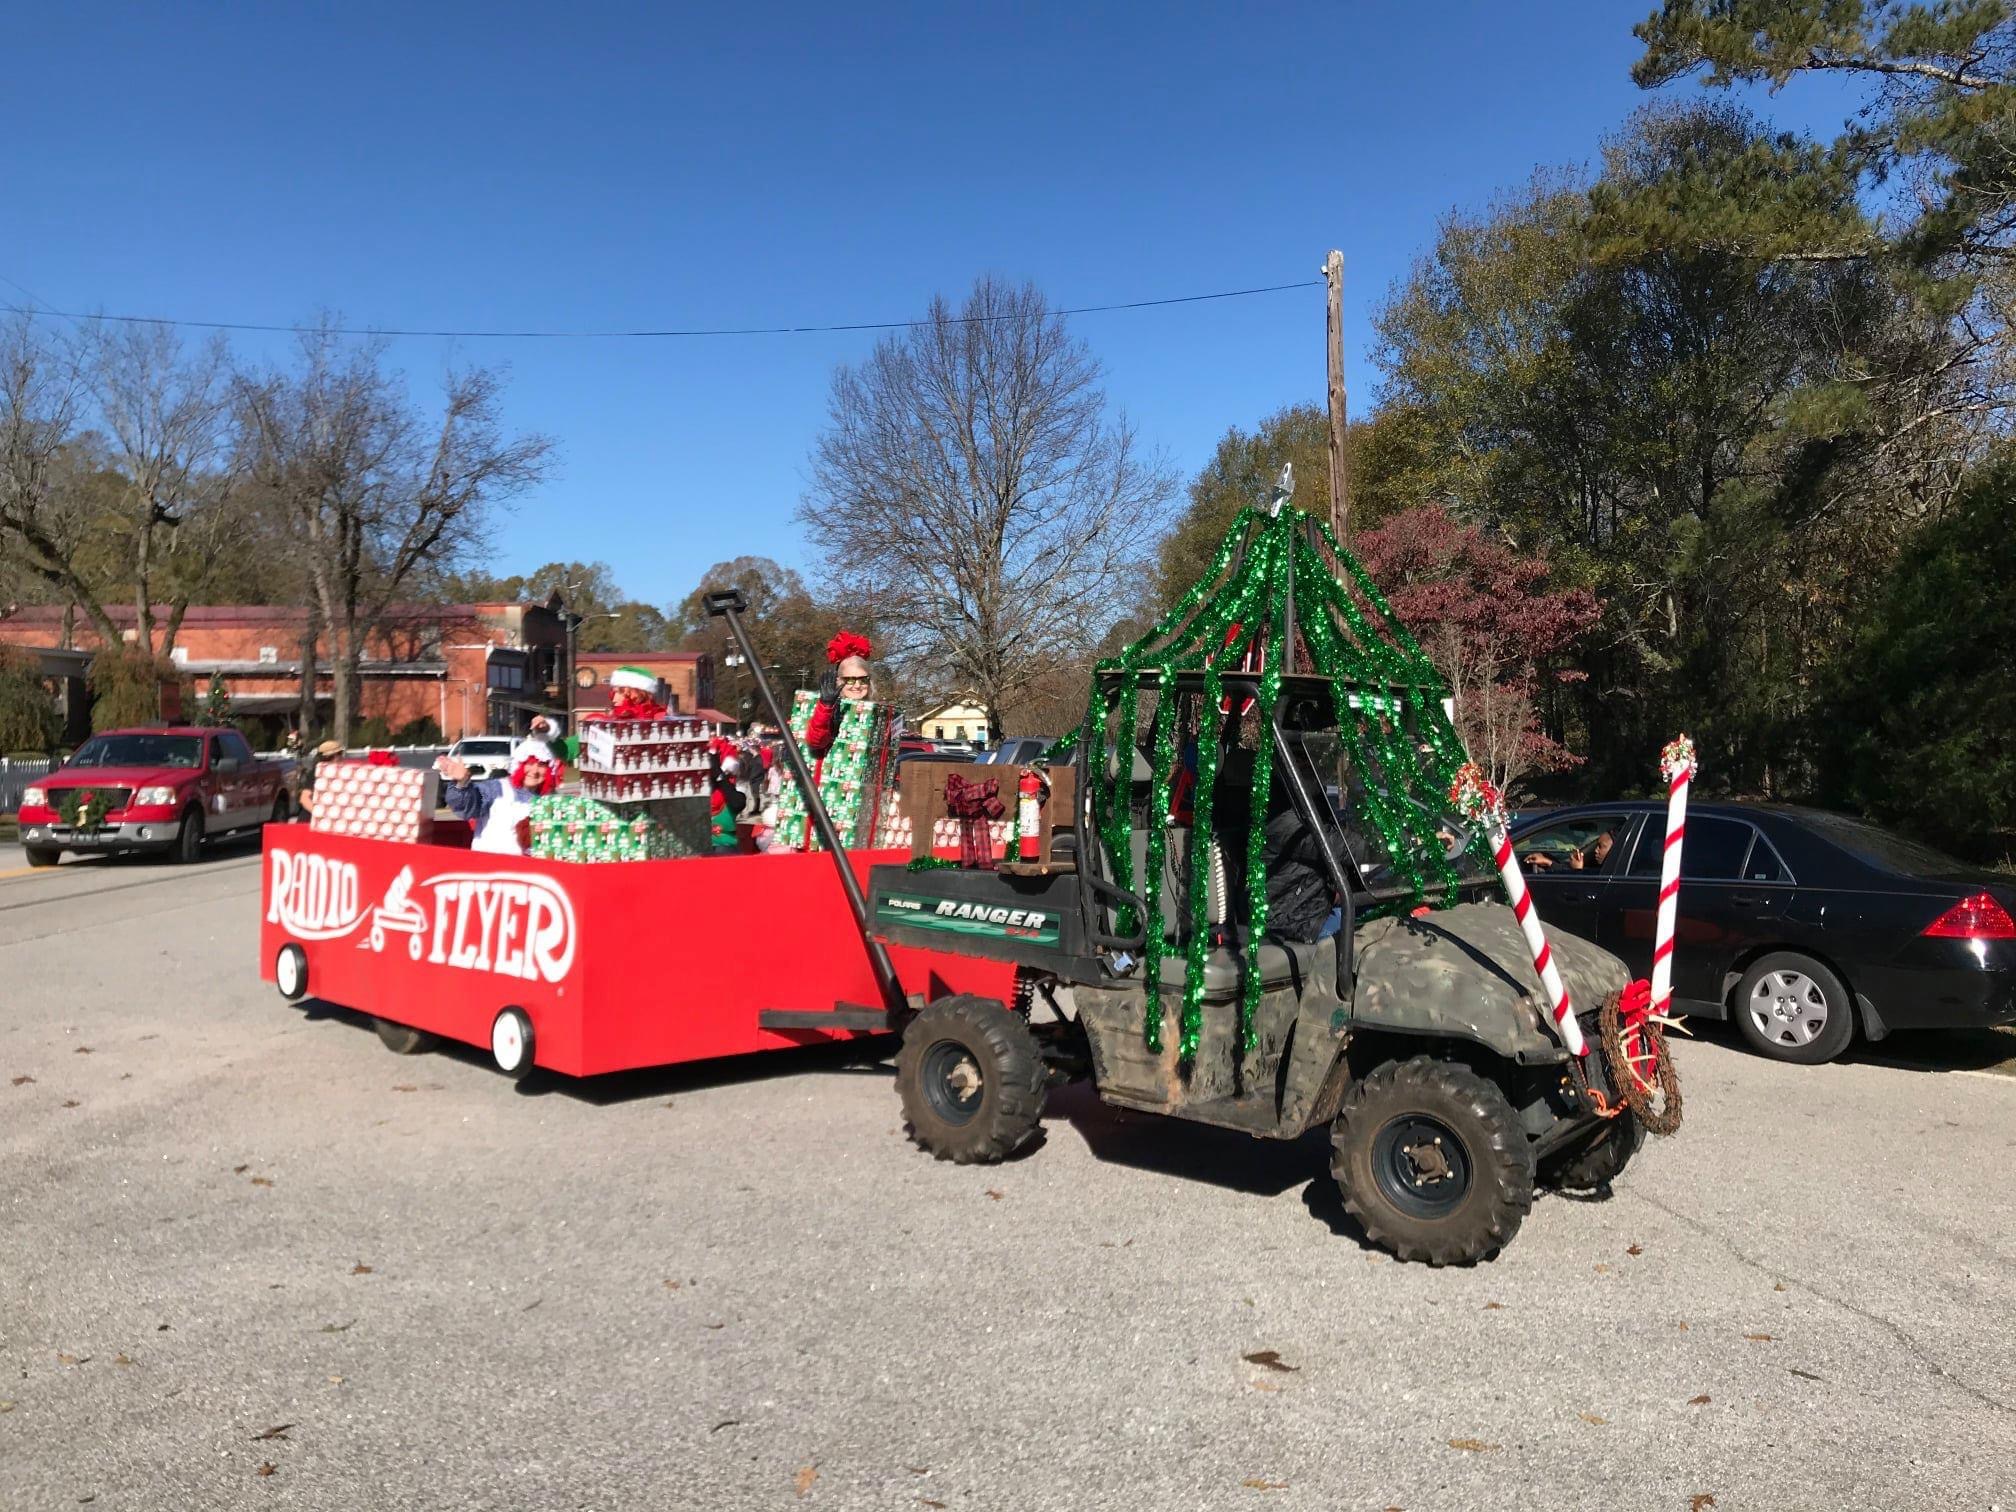 Bigger turnout expected at parade The Oglethorpe Echo